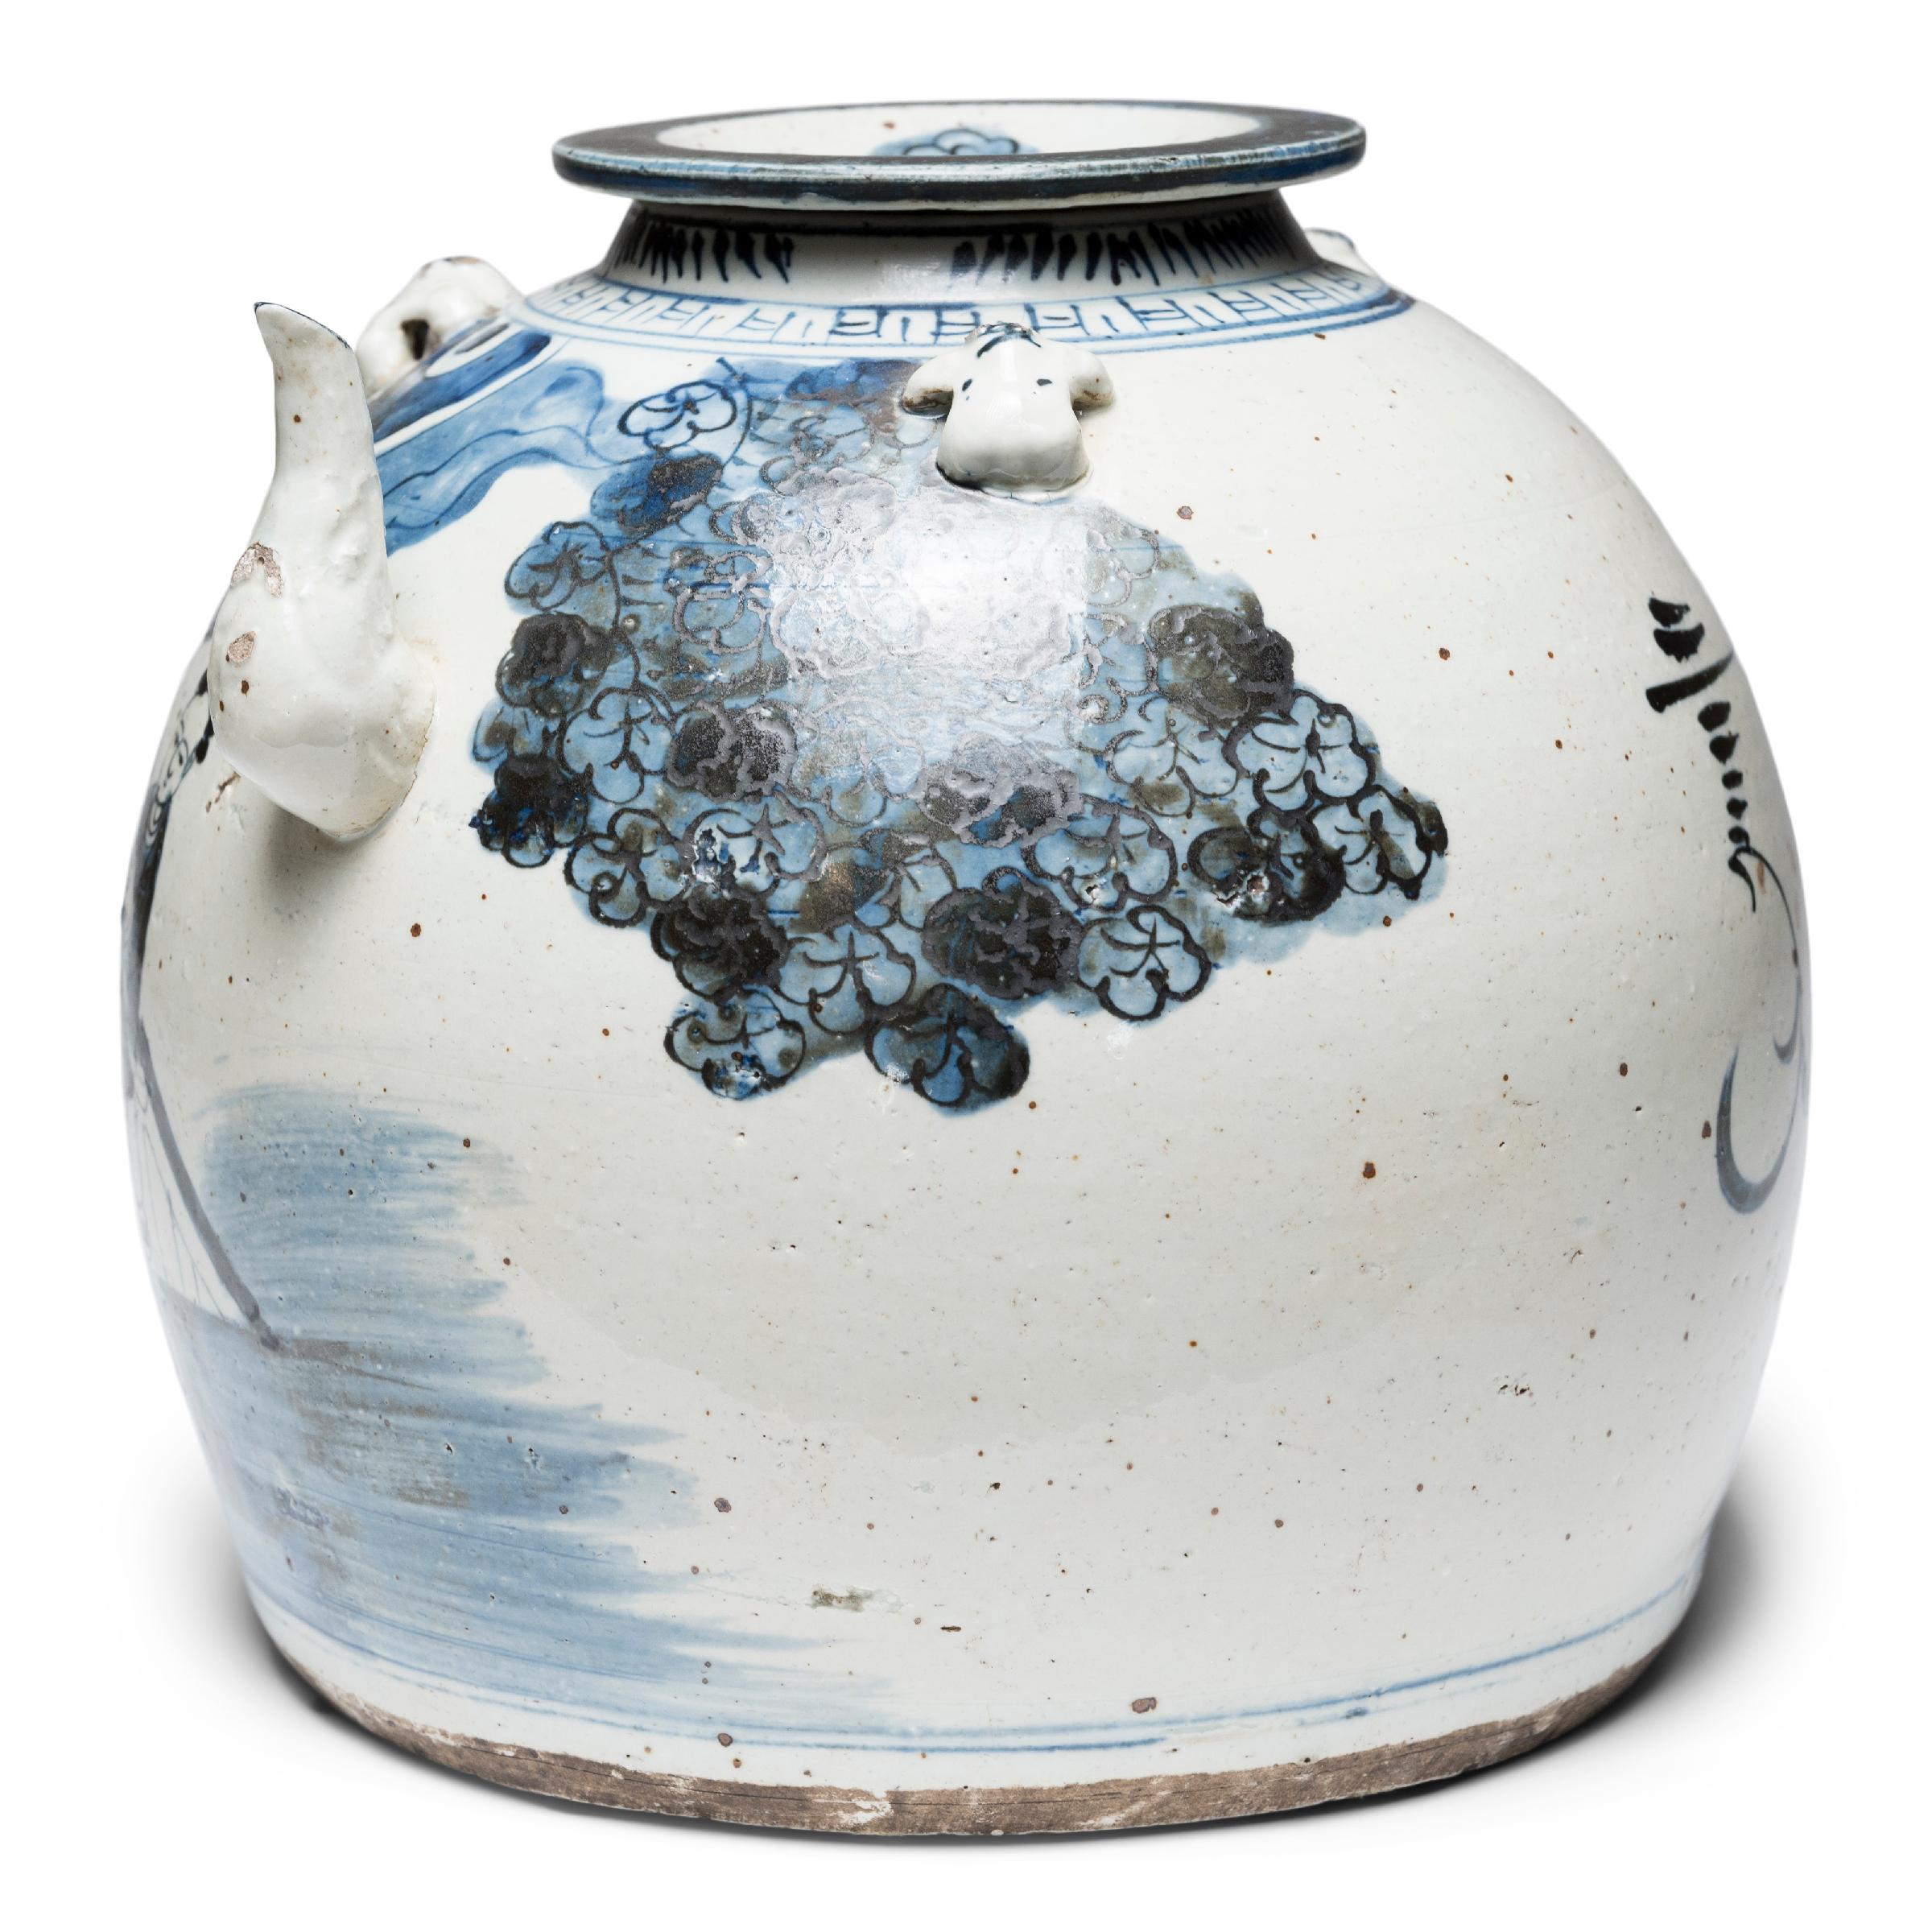 Brushed with a dark, blue-black glaze atop a white field, this Qing-dynasty water vessel is wonderfully painted in a carefree style with stylized figures and loose shading. Designed for serving water or tea, the squat jar has a rounded form with a